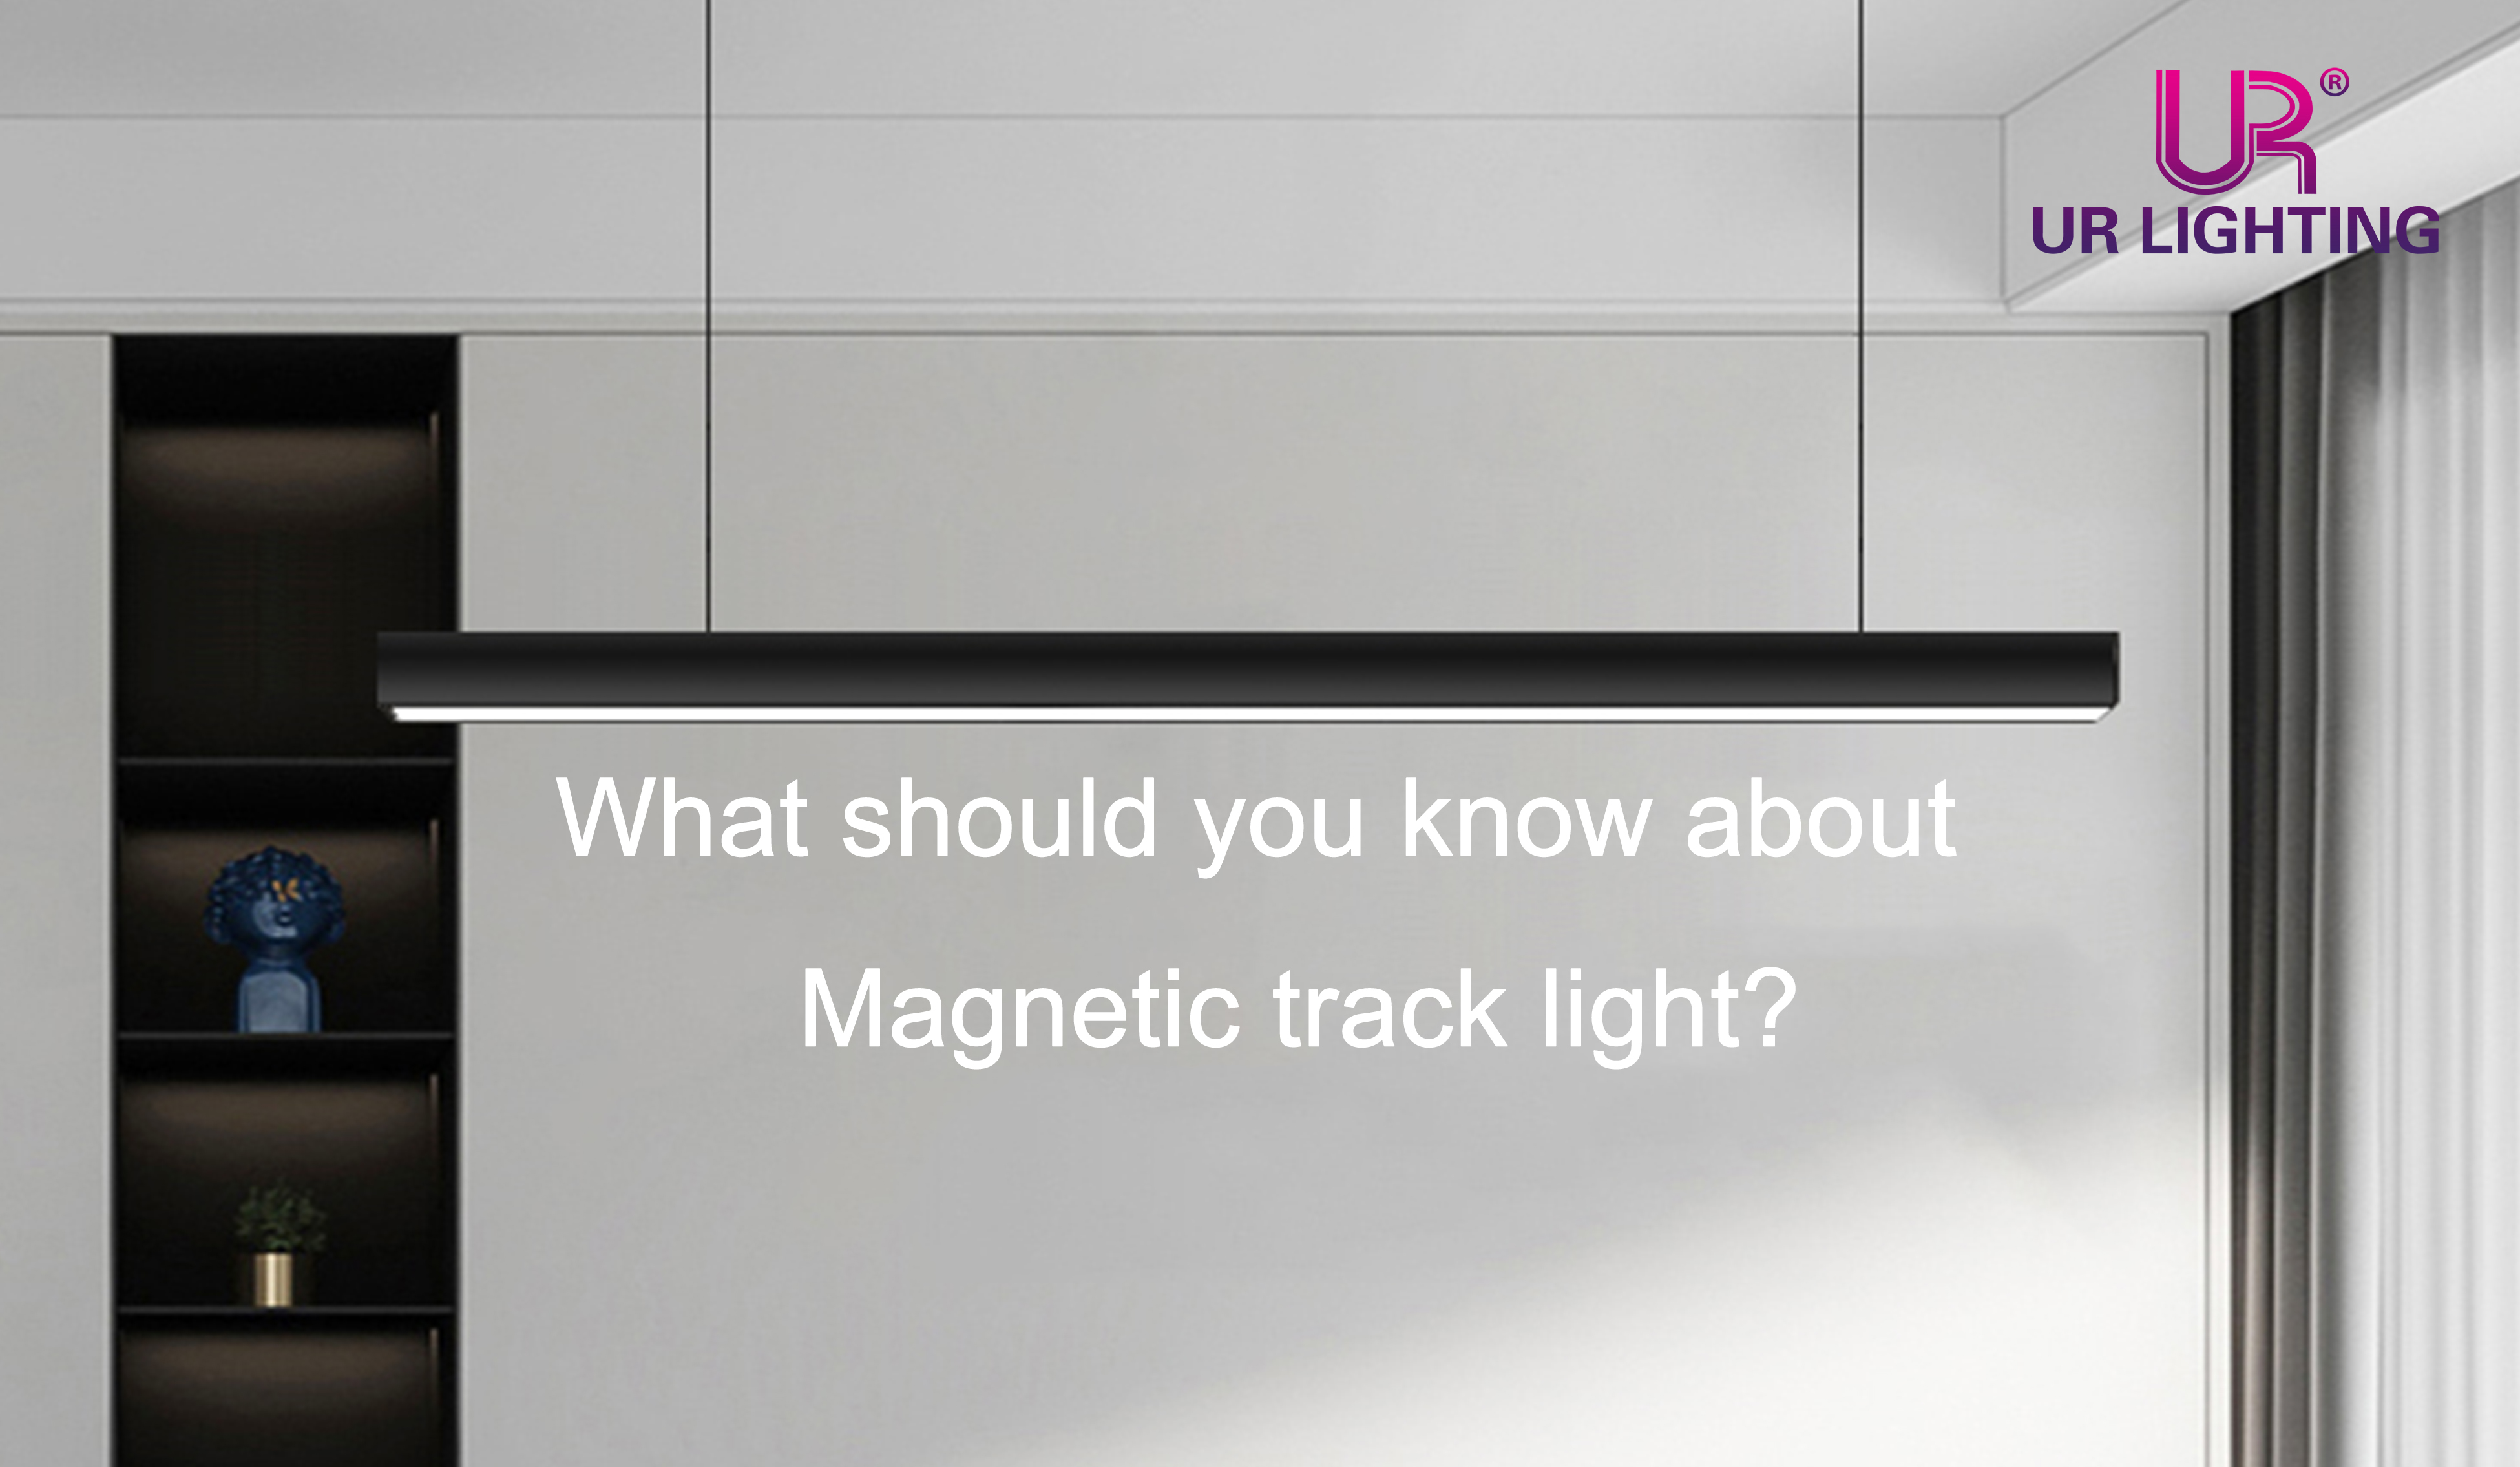 What should you know about Magnetic track light?